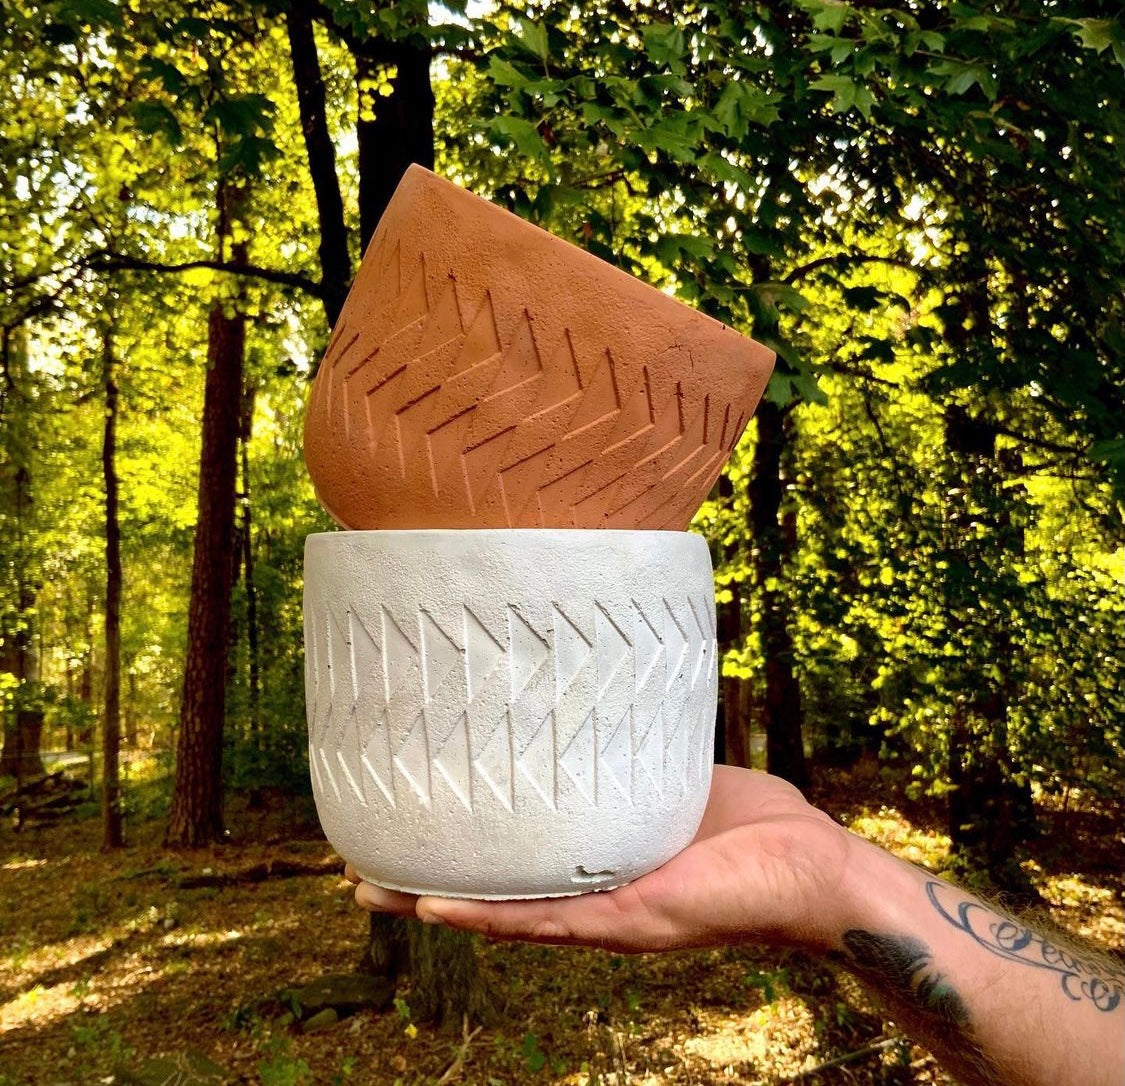 Two different colors of the Arlo planter sit stacked on an outstretched hand, in front of a forest background.